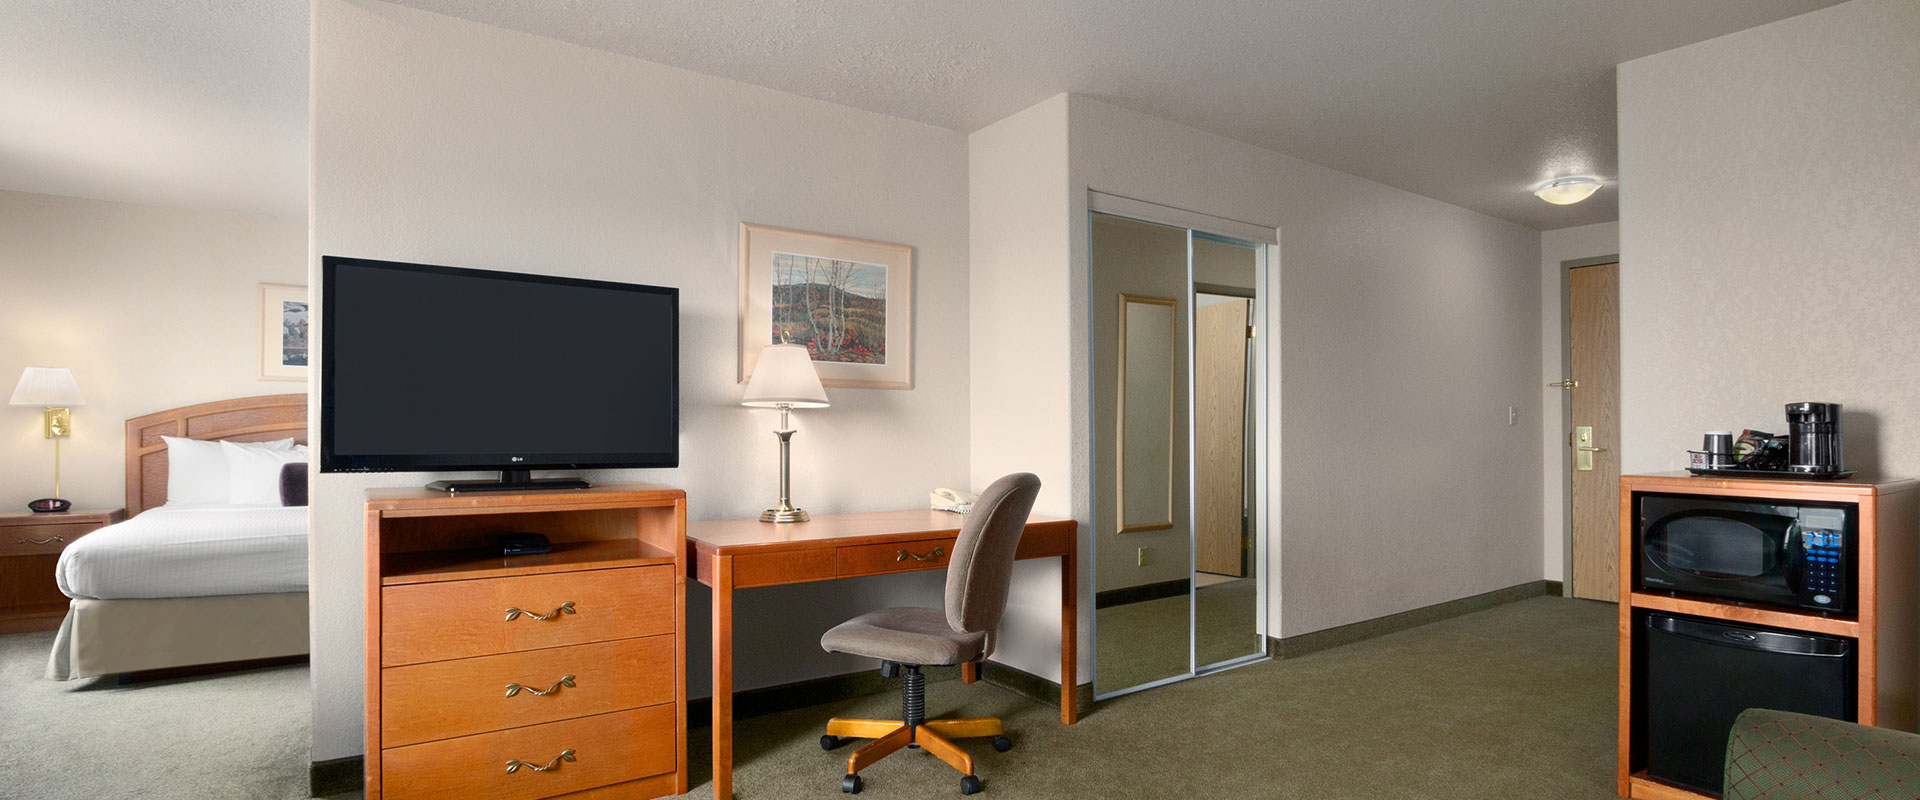 Large view of a suite at Days Inn Red Deer, Alberta with a rectangular work table and chair, a TV perched on a cabinet of drawers and mirrored closet.
